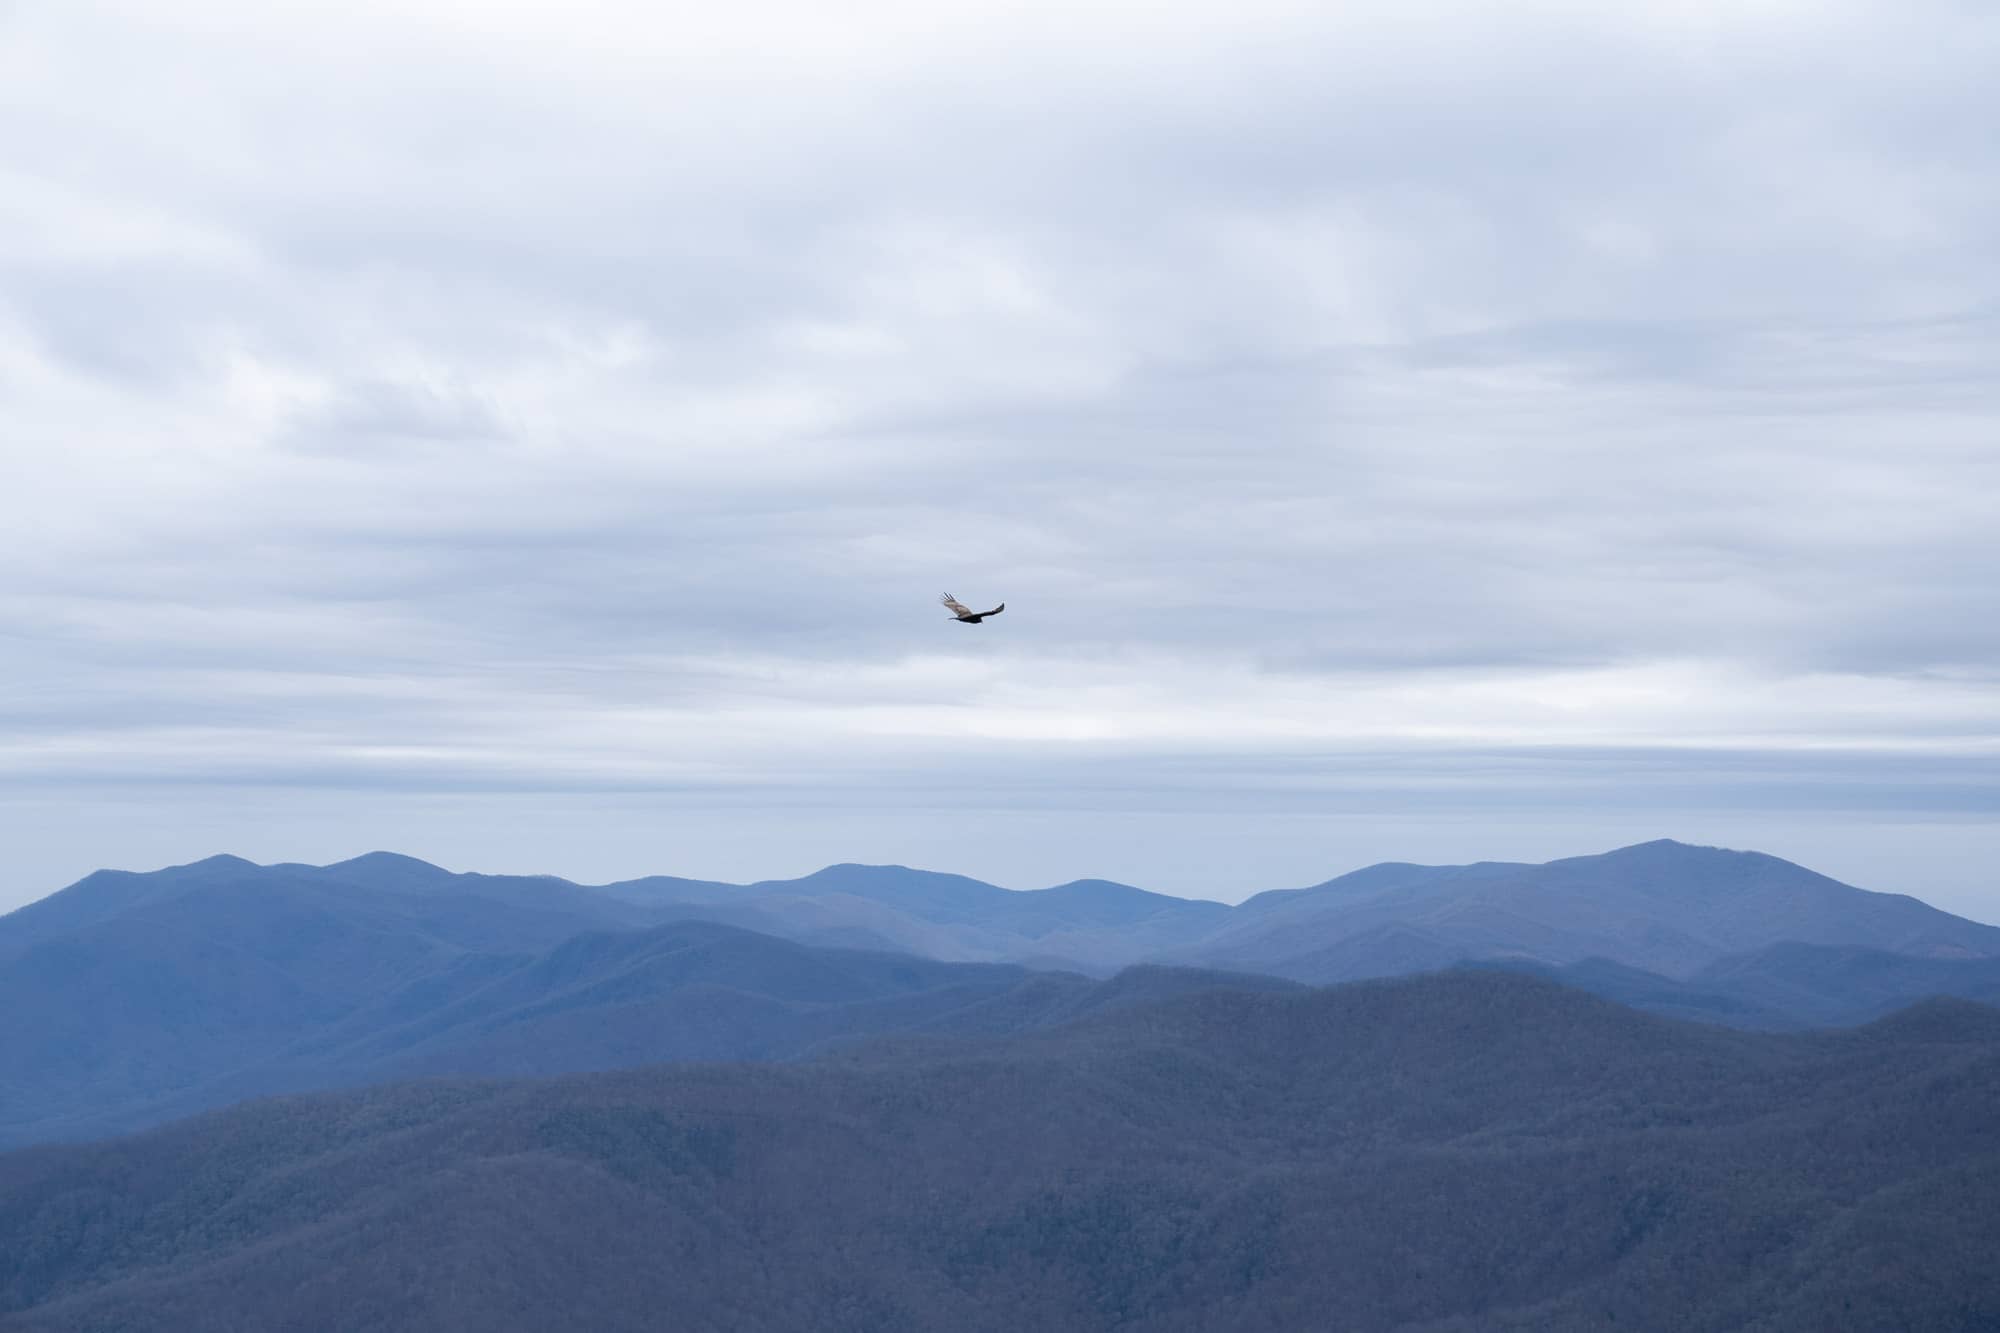 A bird soars across the sky during the fourth day of backpacking a section of the Appalachian Trail in the Nantahala National Forest on Tuesday, March 8, 2022, at the Wayah Bald Lookout Tower near Franklin, North Carolina.